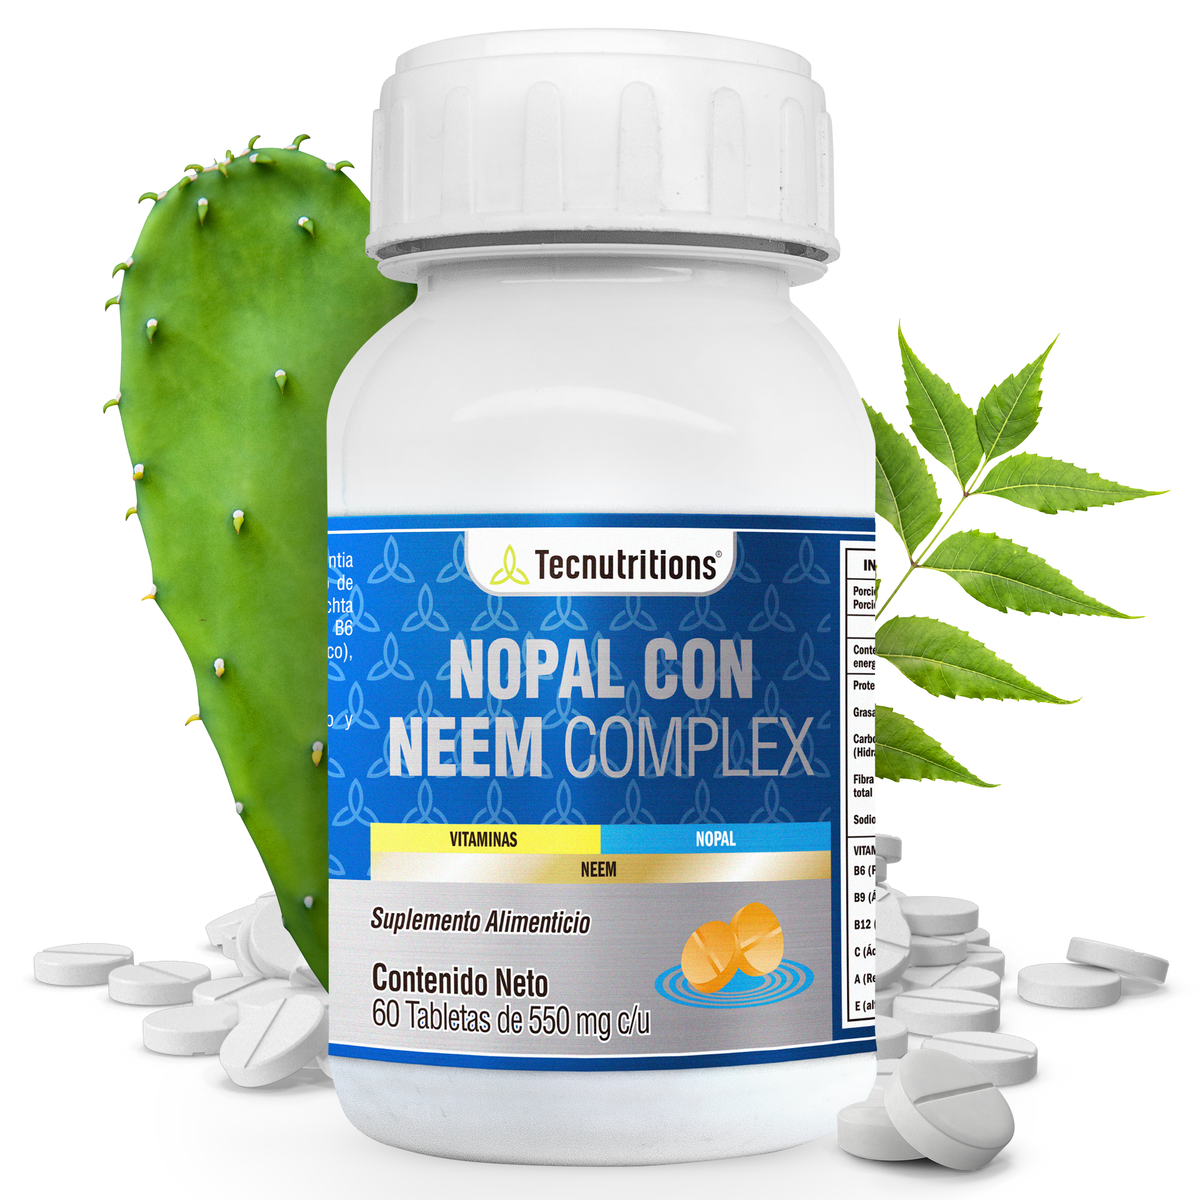 Food supplement with vitamins, antioxidants and fiber, Nopal with Neem Complex, 60 tabl